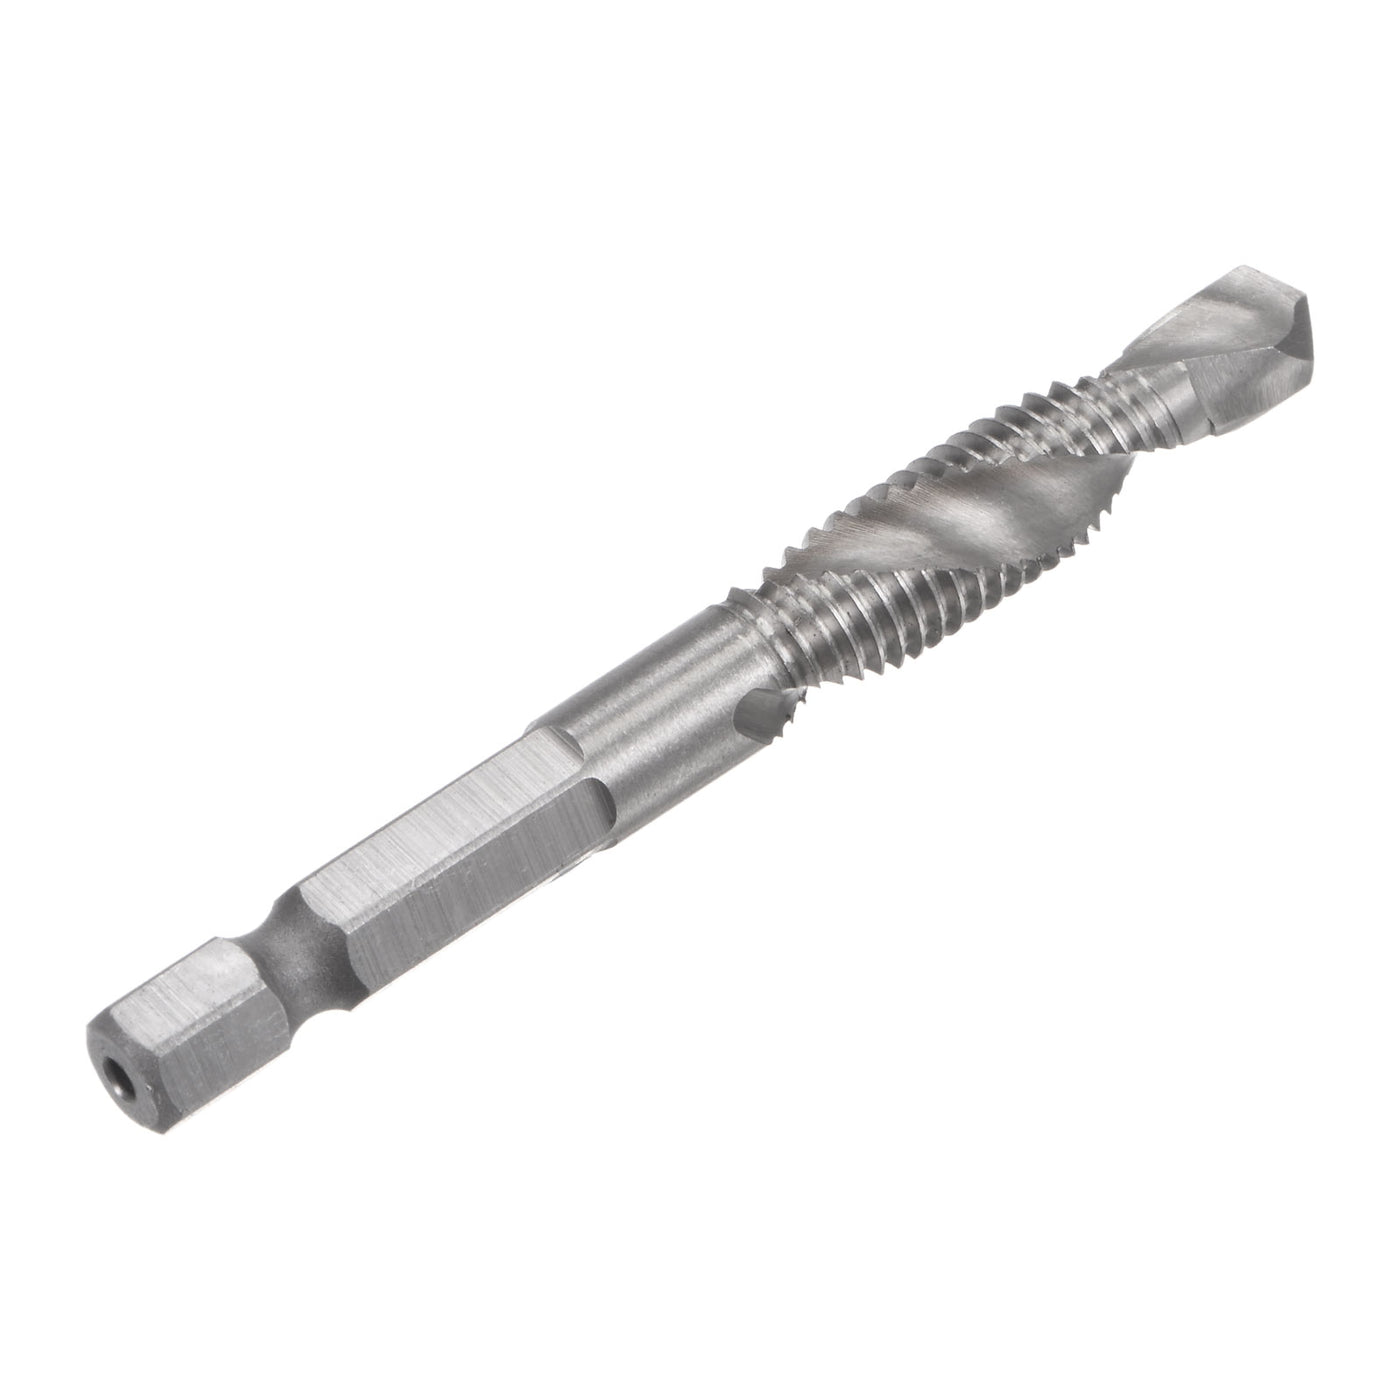 Uxcell Uxcell M8x1.25 High Speed Steel 4341 Combination Drill and Tap Bit Extra Long 2pcs